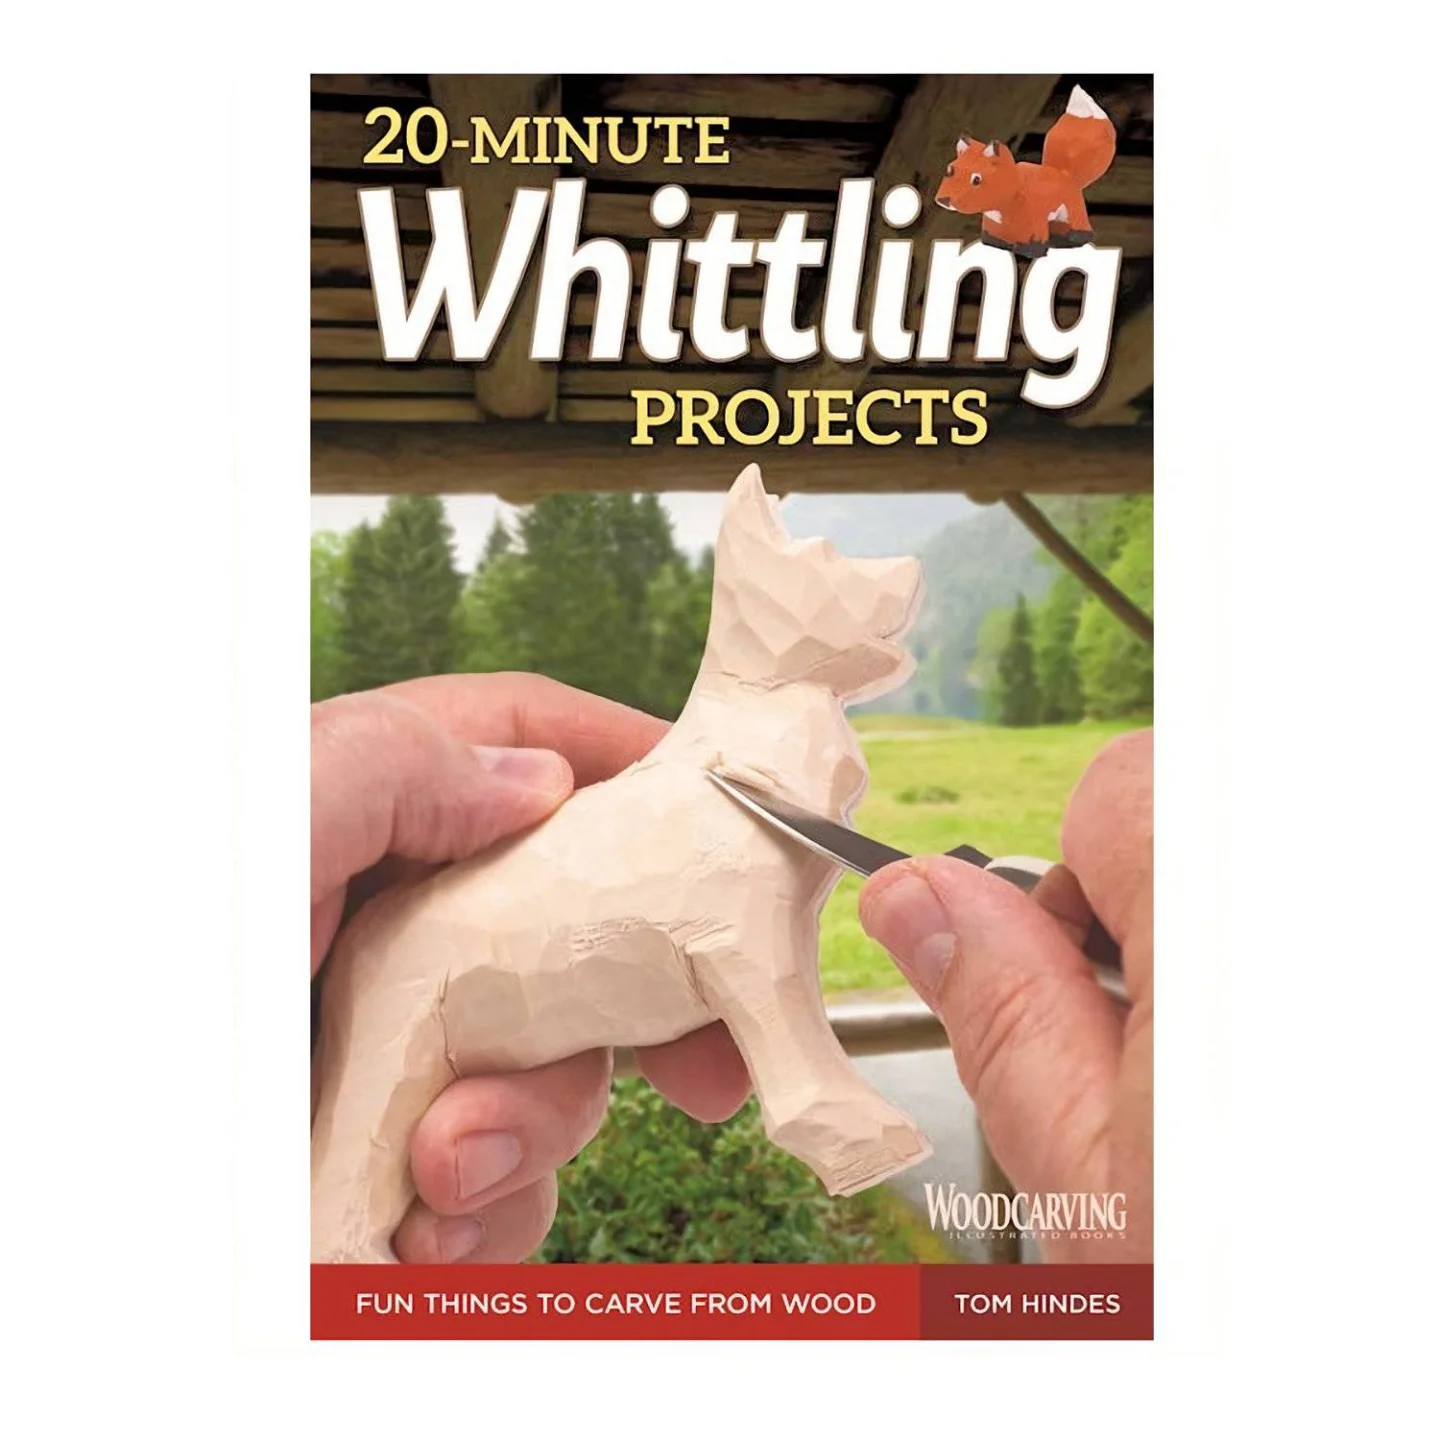 20-Minute-Whittling-Projects.